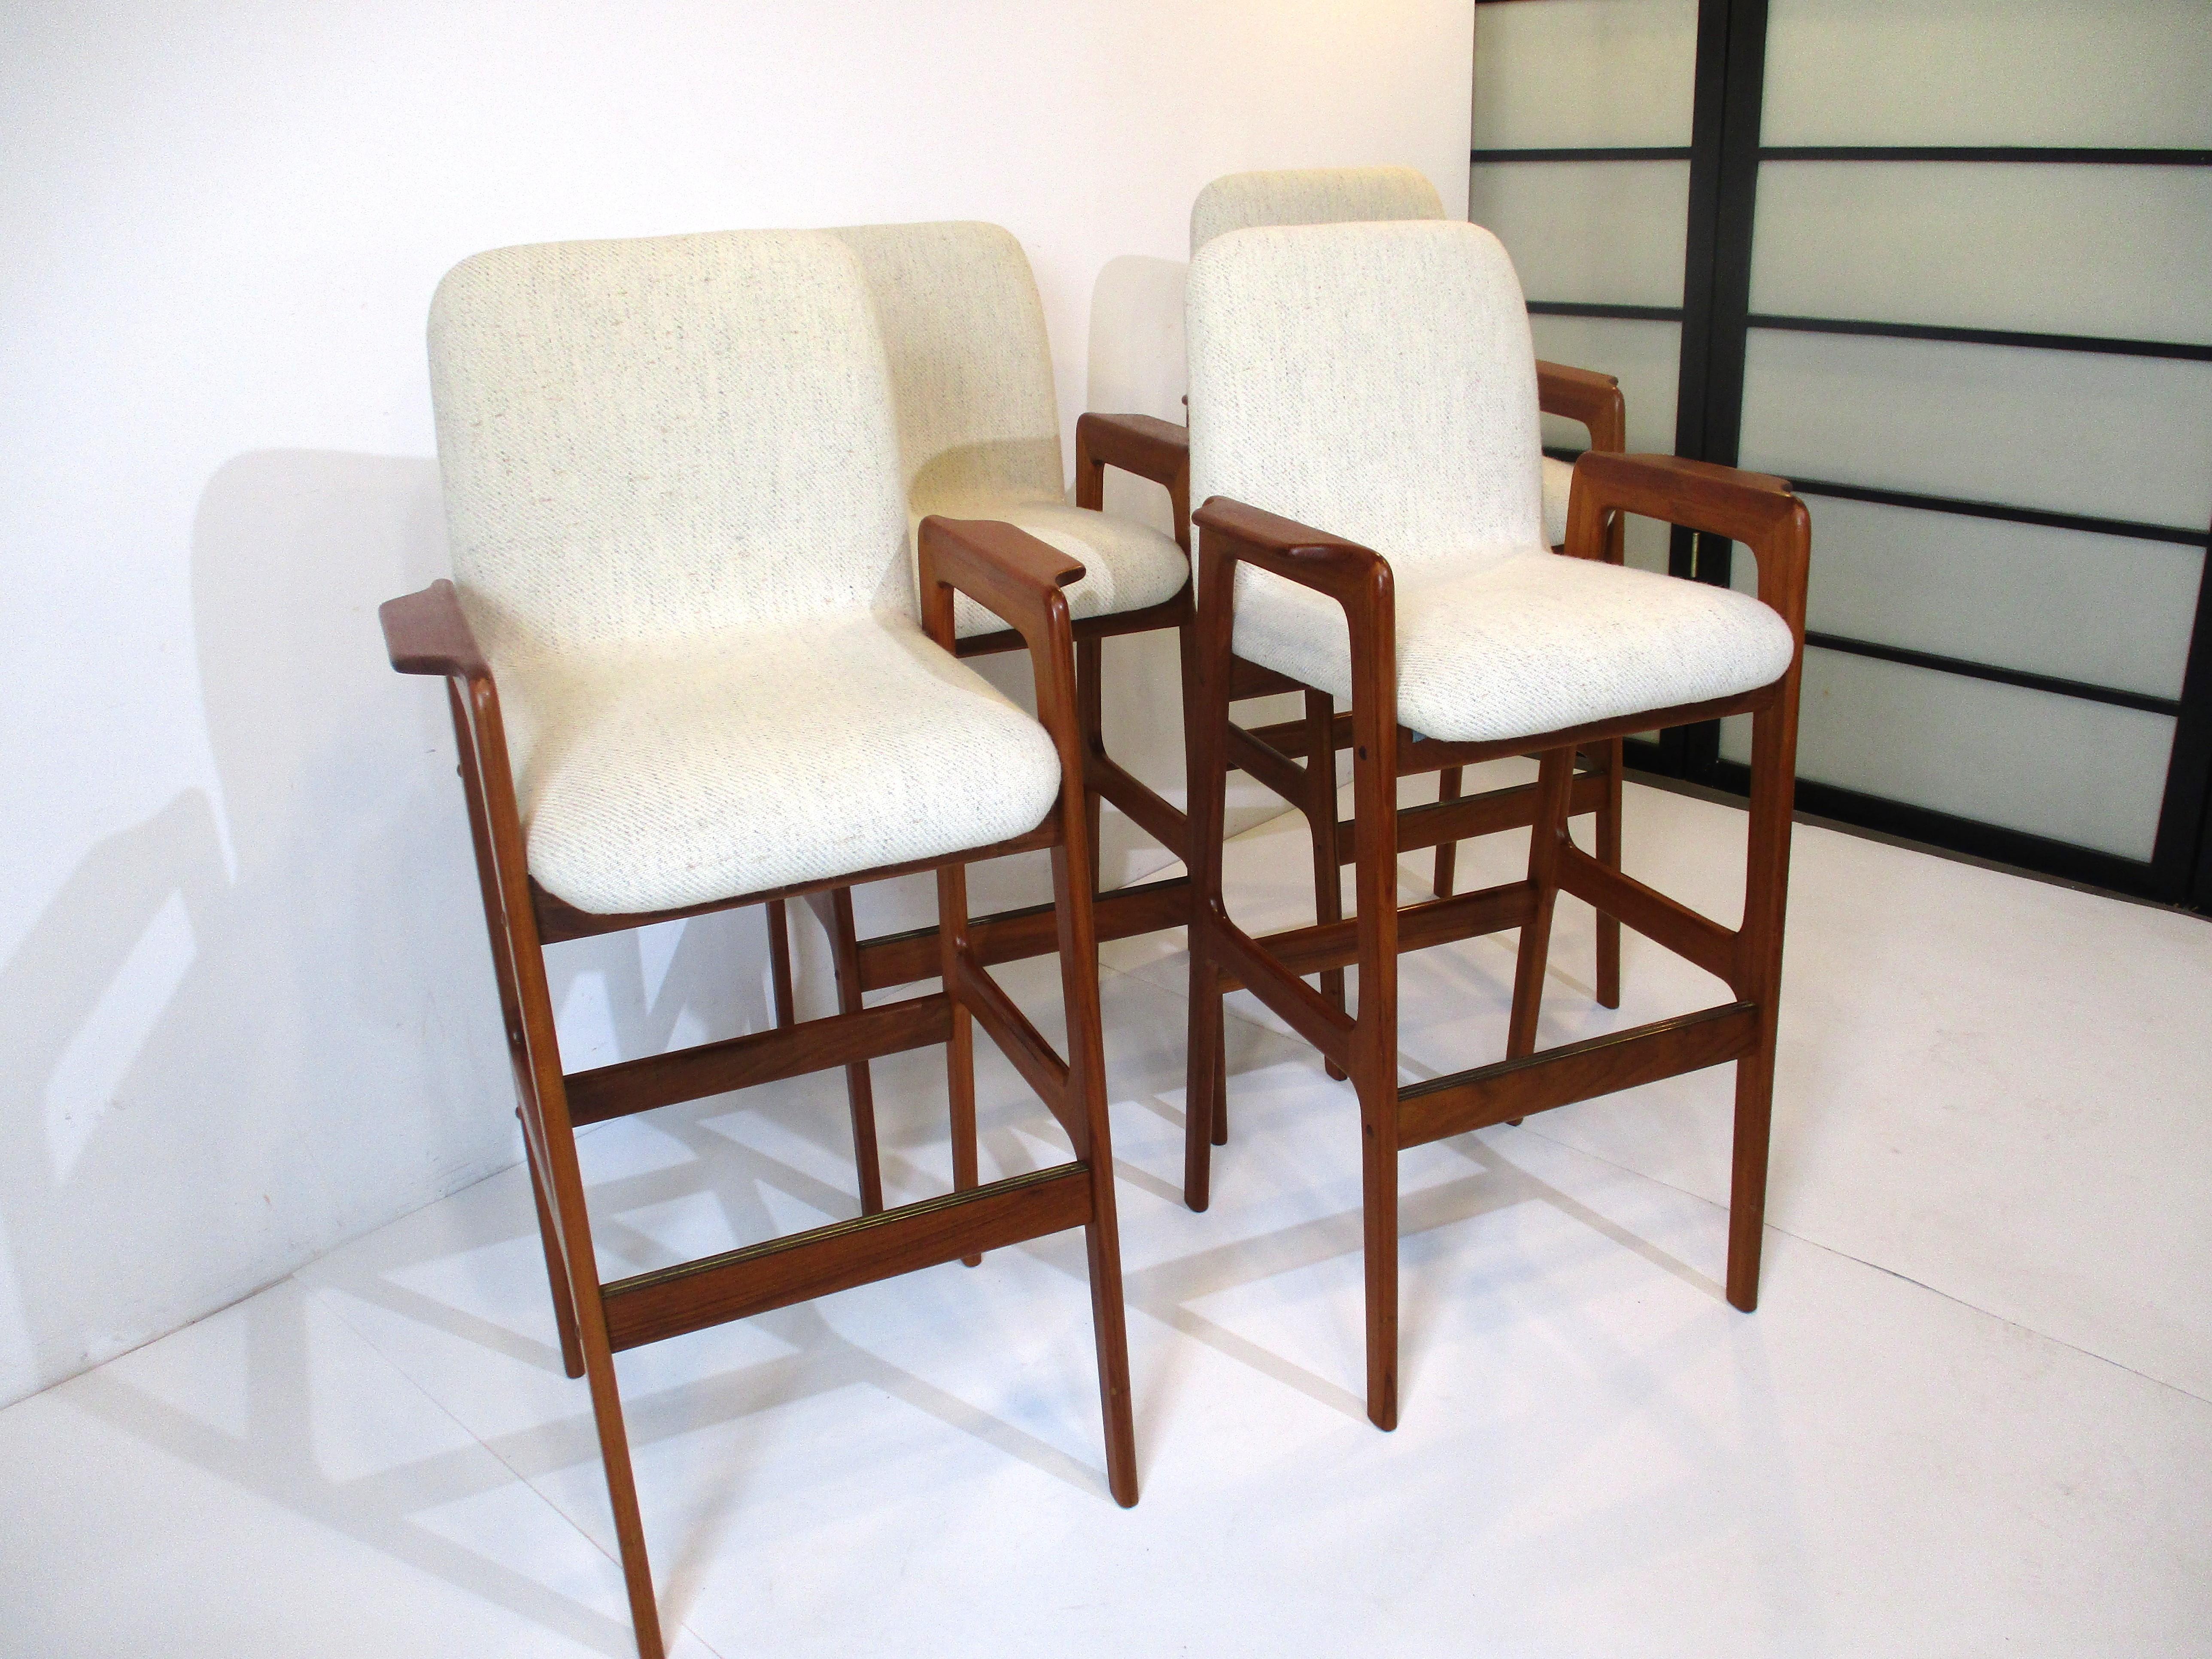 A set of four very comfortable teak wood framed bar stools with nice arm placement. The upholstered seats are in a tight woven darker cream blended fabric with specks of grays and taupes. The foot rest area has a brass trim strip to protect the